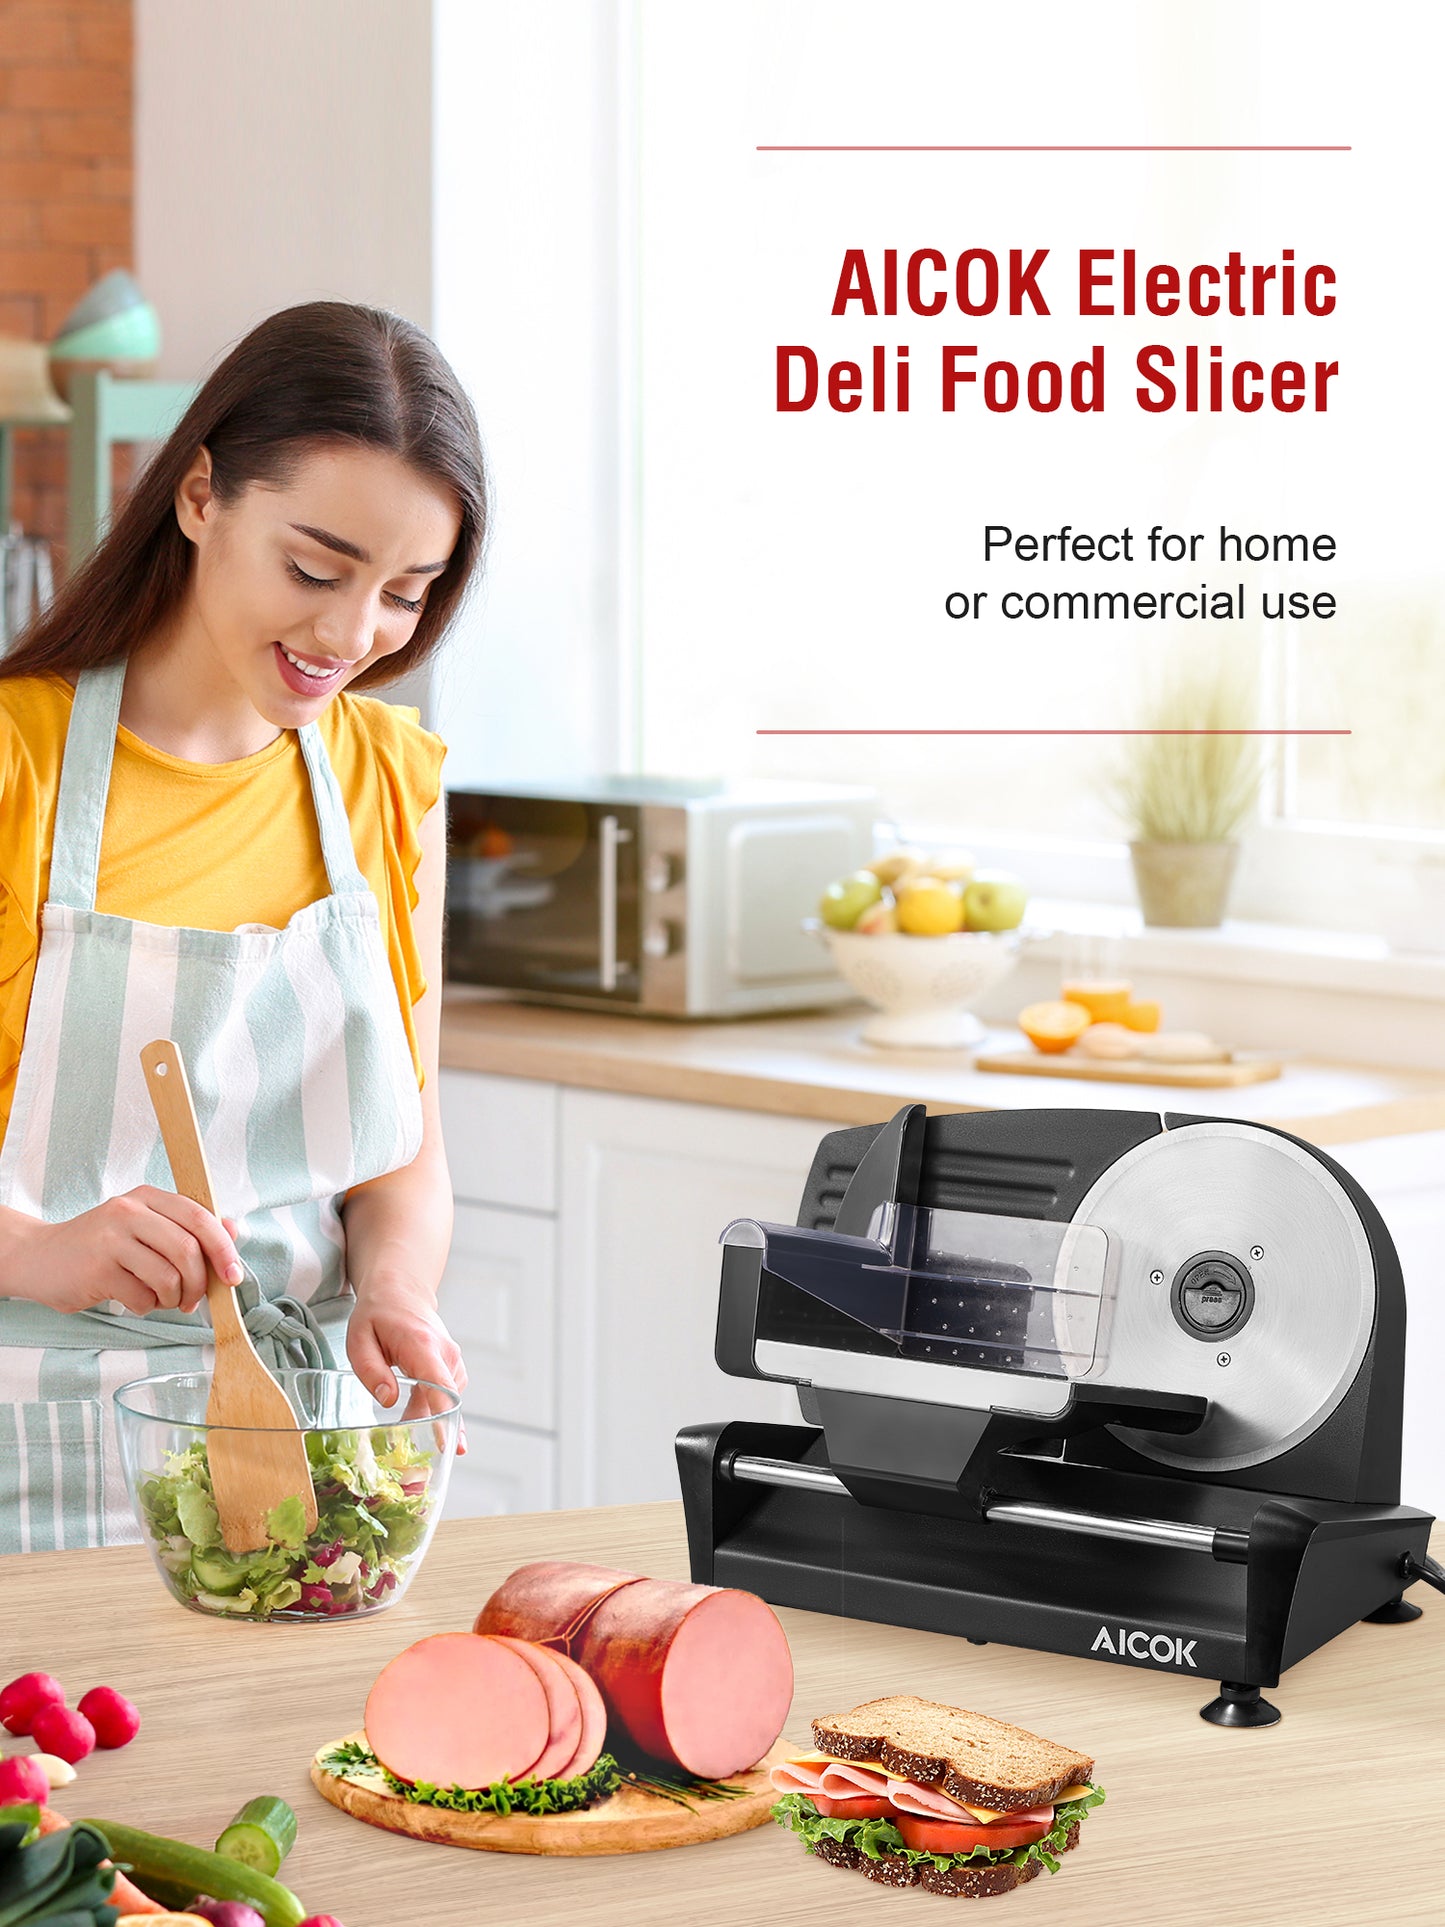 Aicok Home Use Meat Slicer, 200W Electric Deli & Food Slicer Home Use, 0-15mm Adjustable Thickness Food Slicer Machine Cut Meat, Cheese, Bread SL-519N